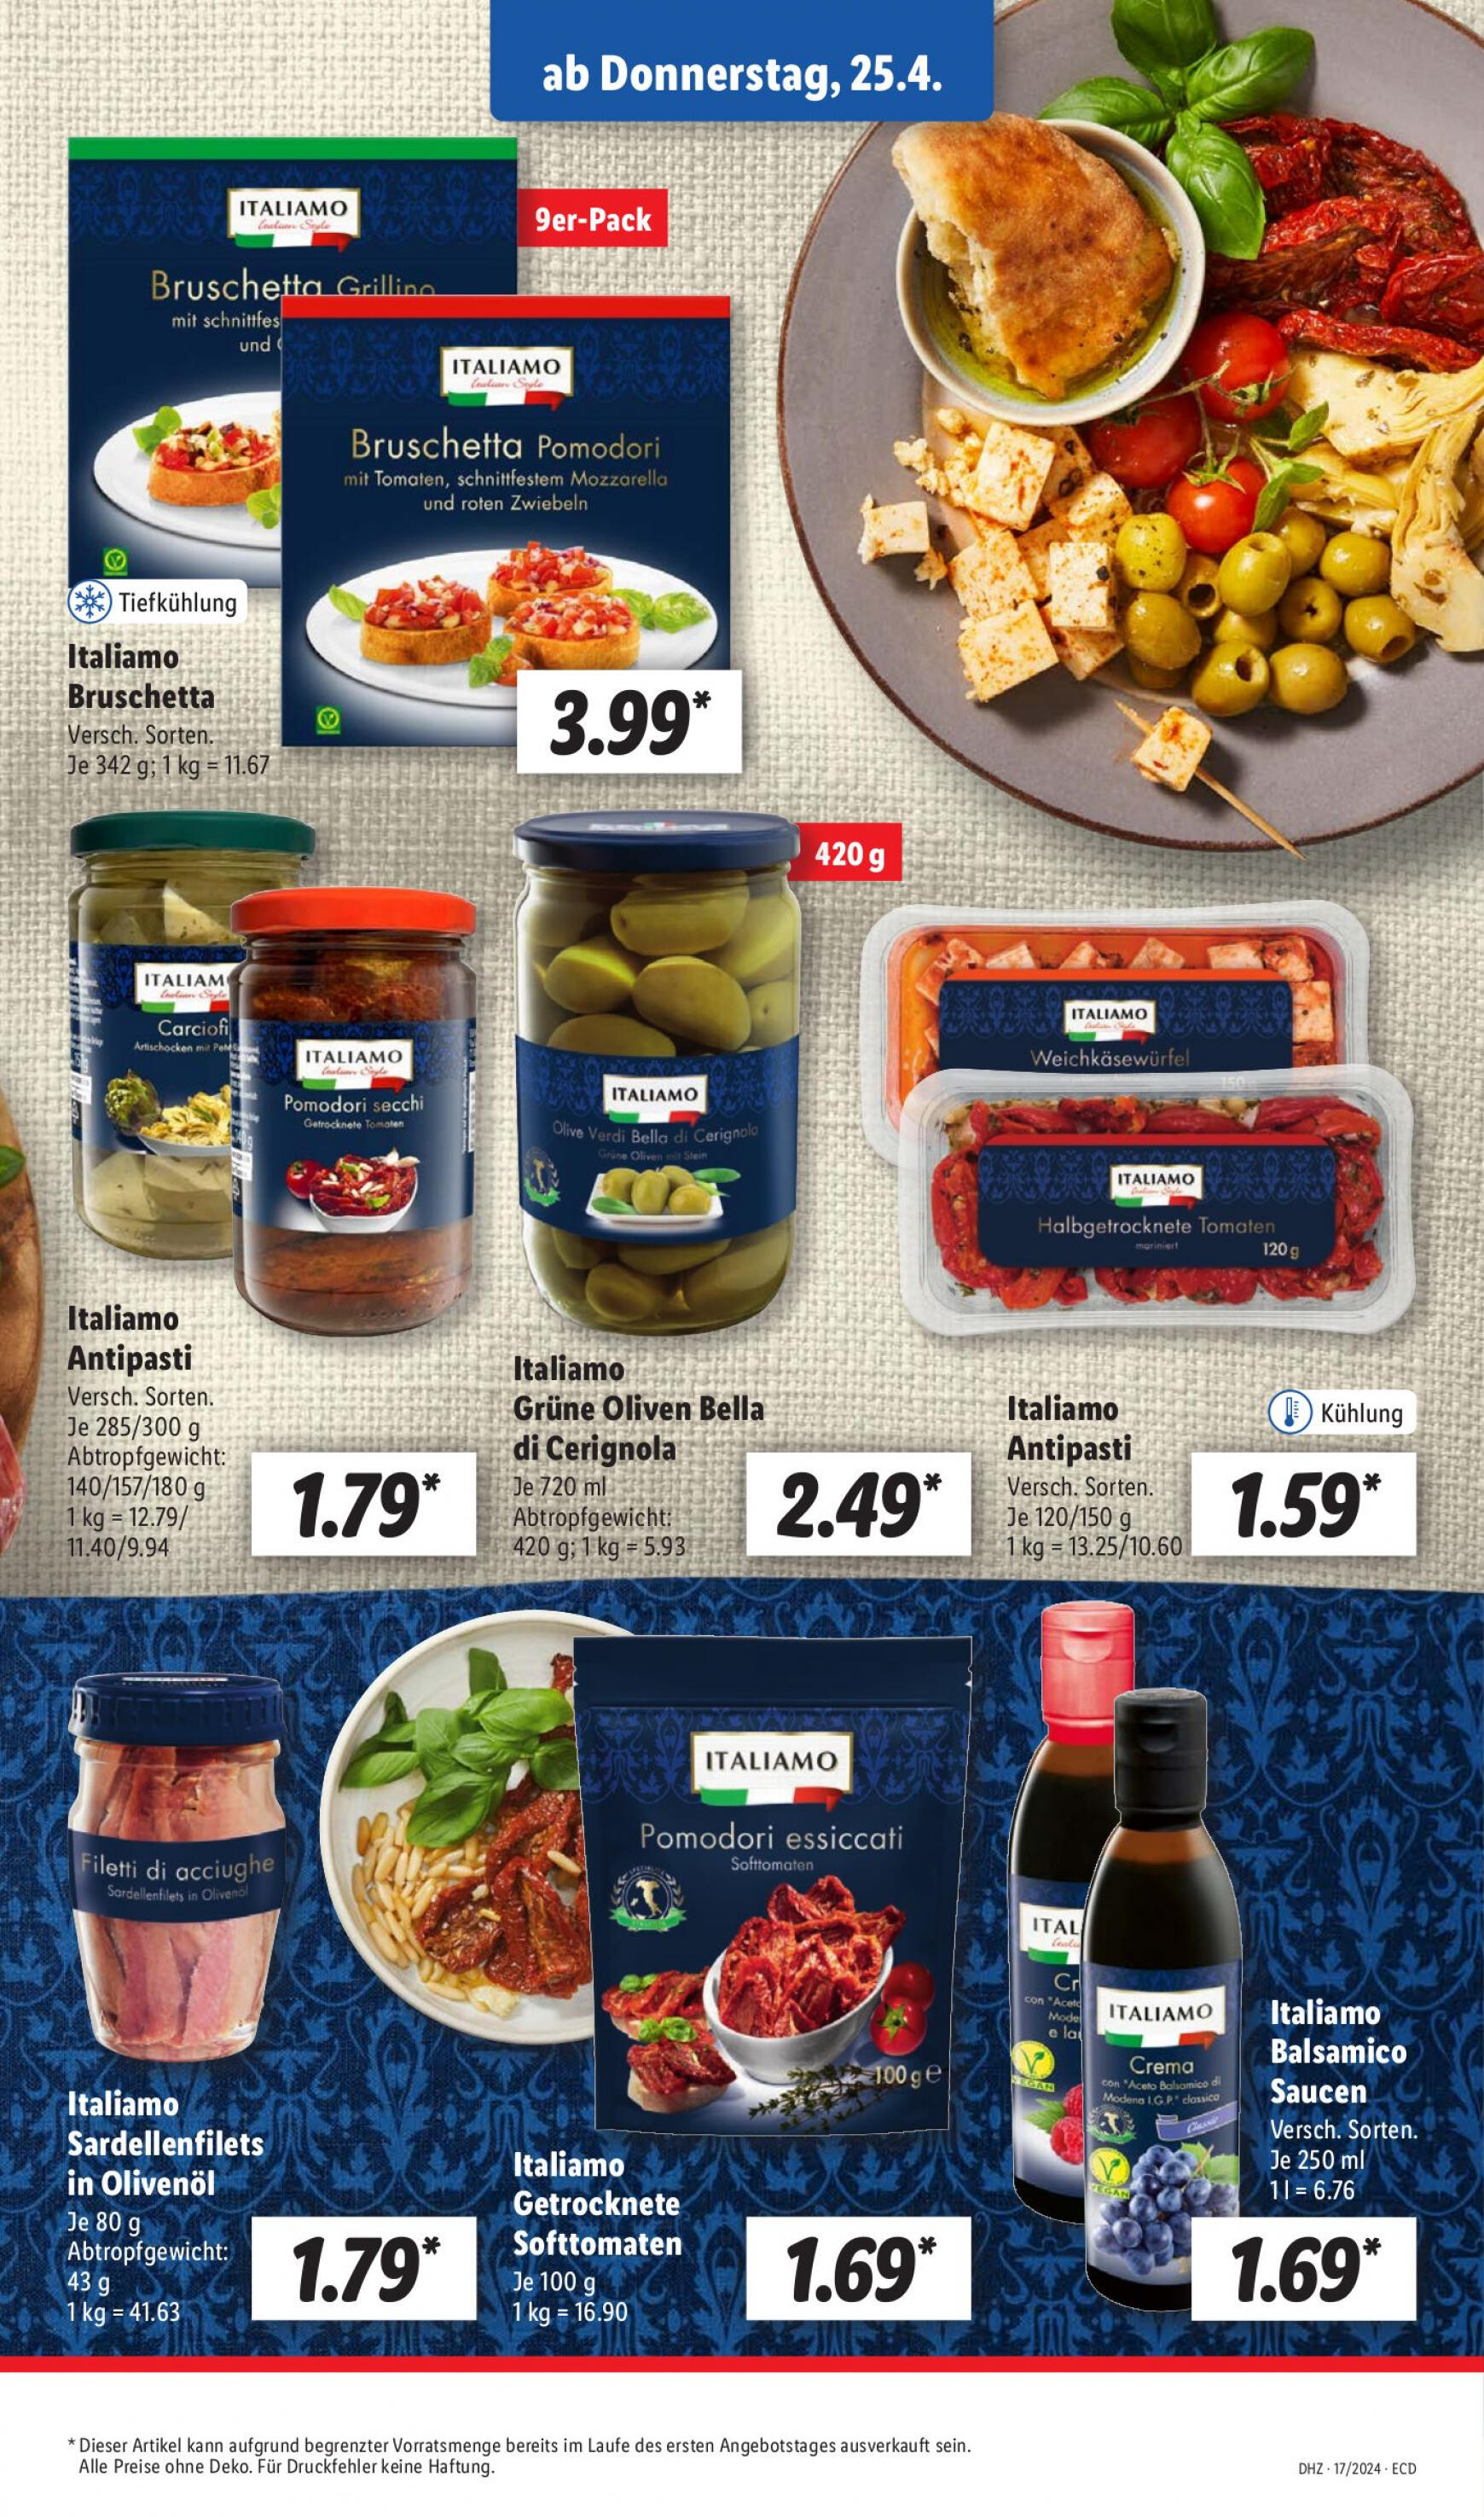 lidl - Flyer Lidl aktuell 22.04. - 27.04. - page: 47